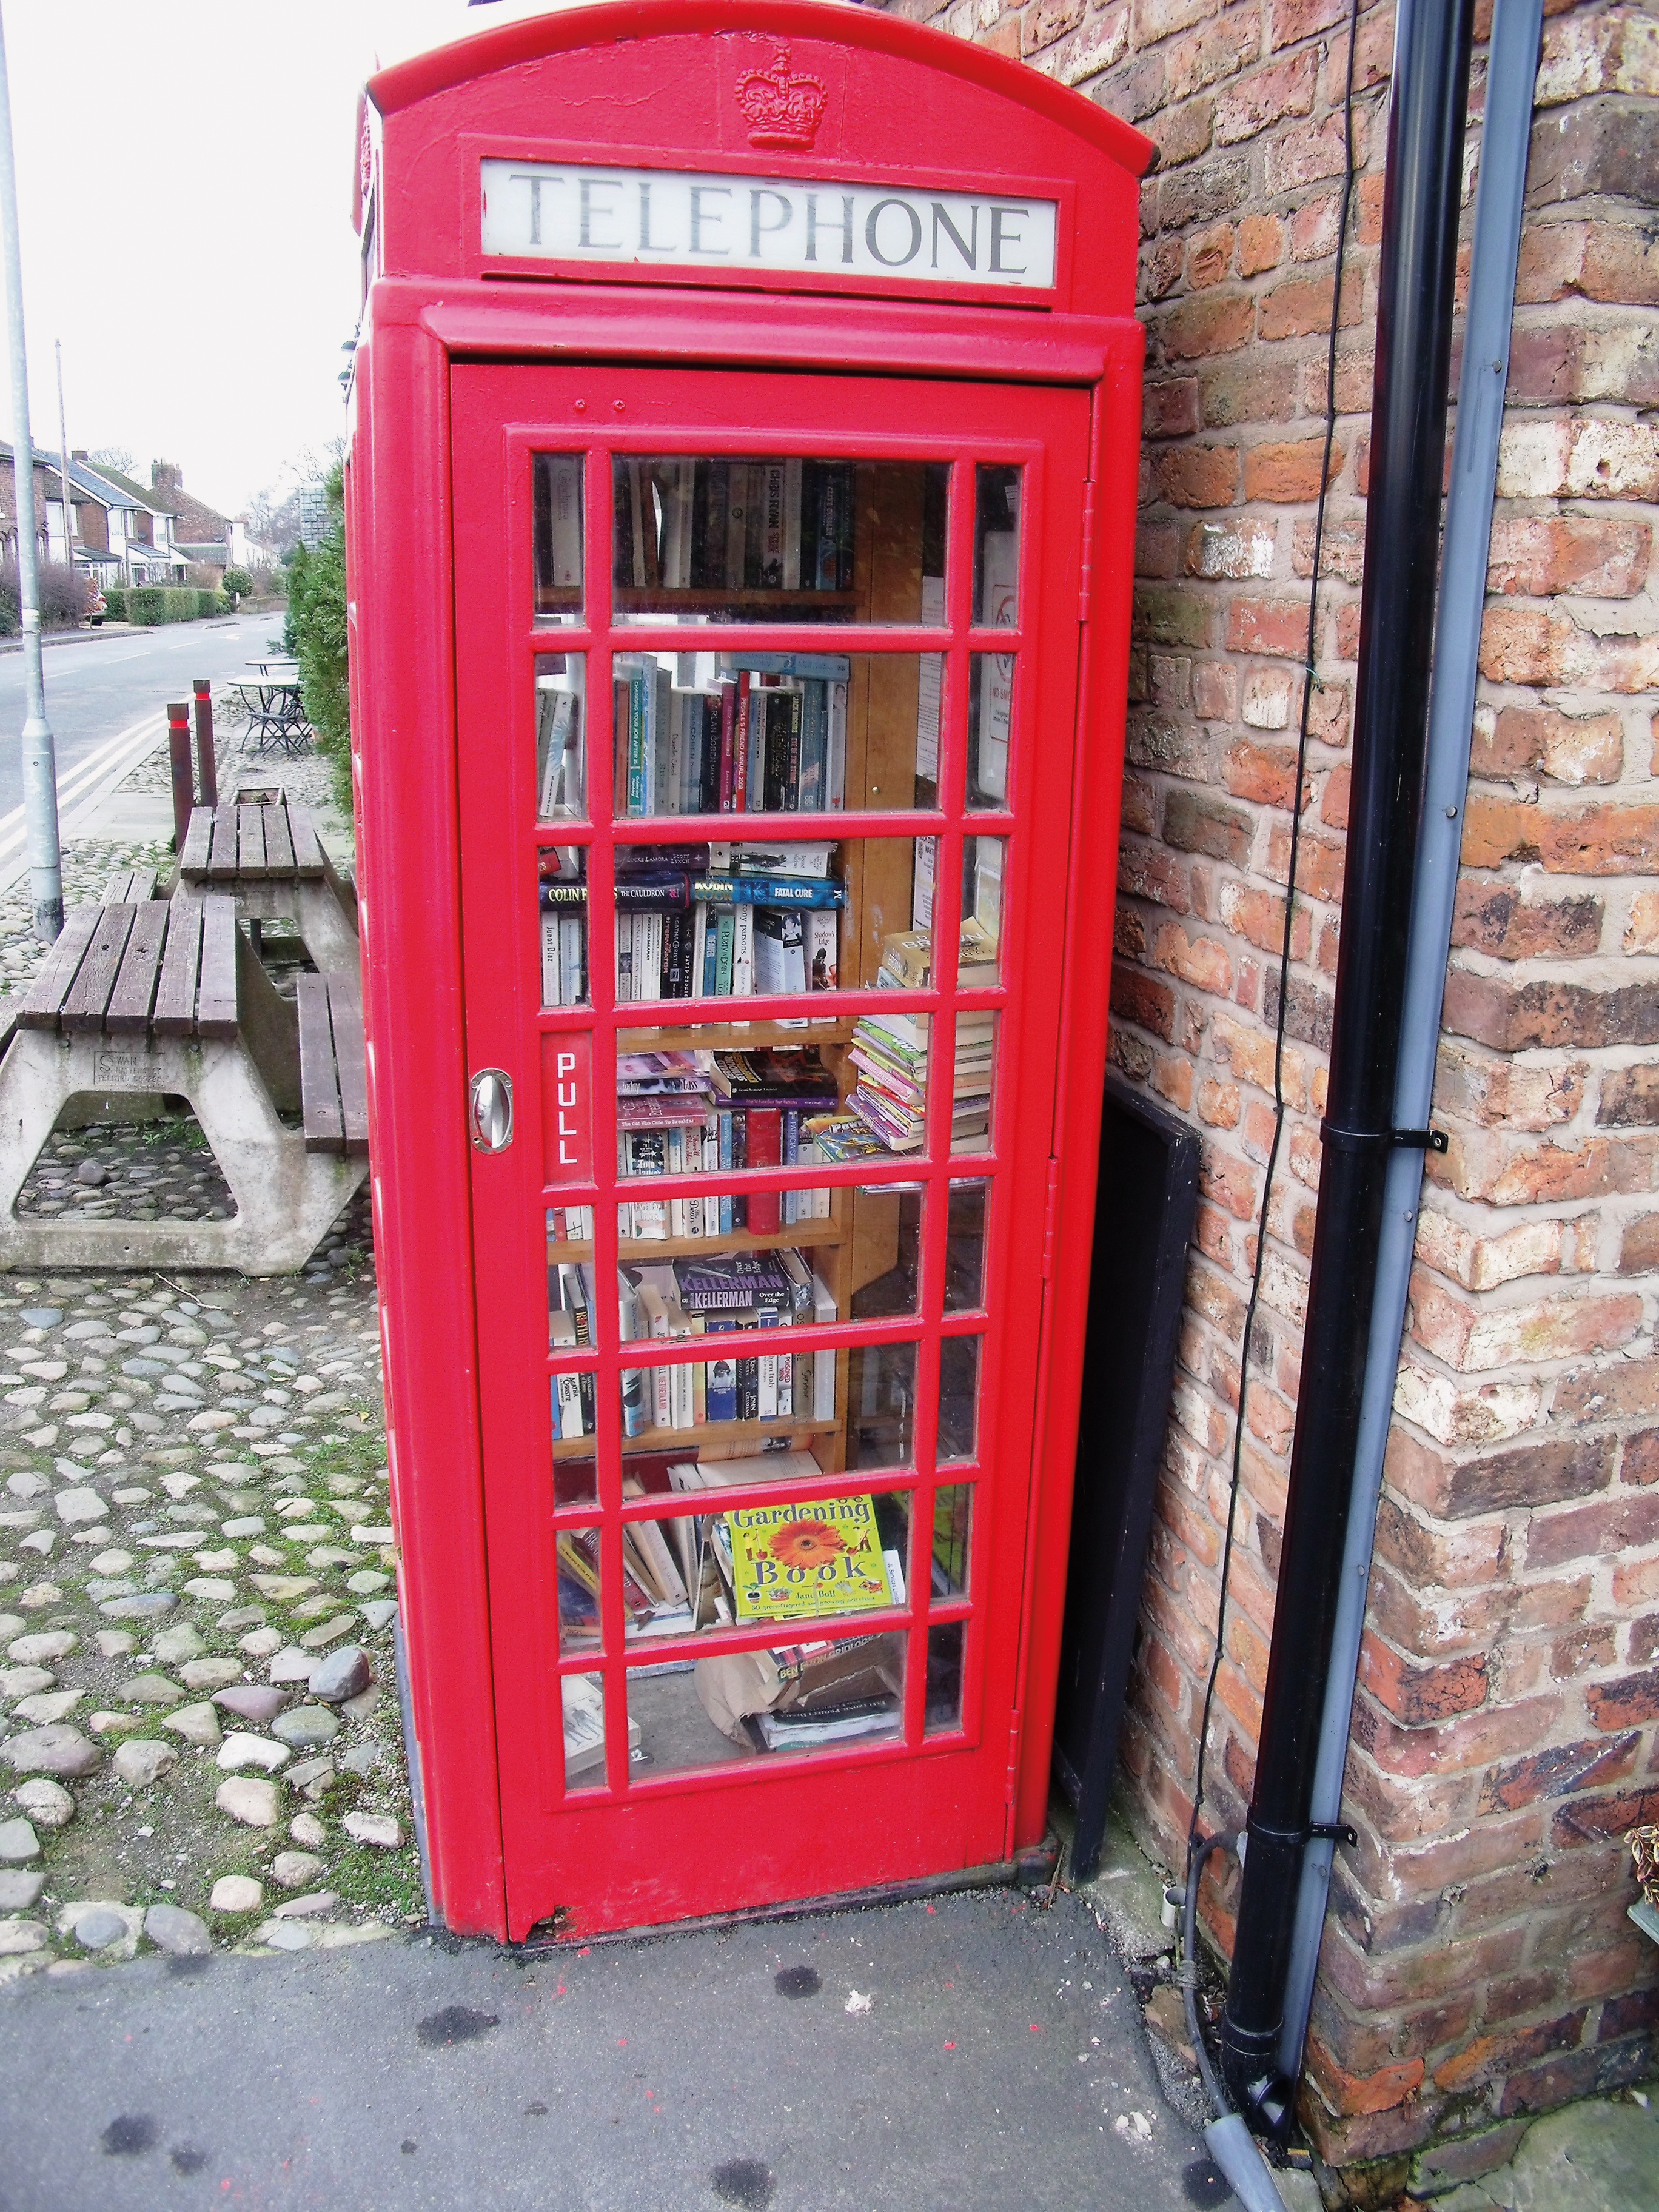 Britain's classic red telephone boxes get a new life | CNN Travel